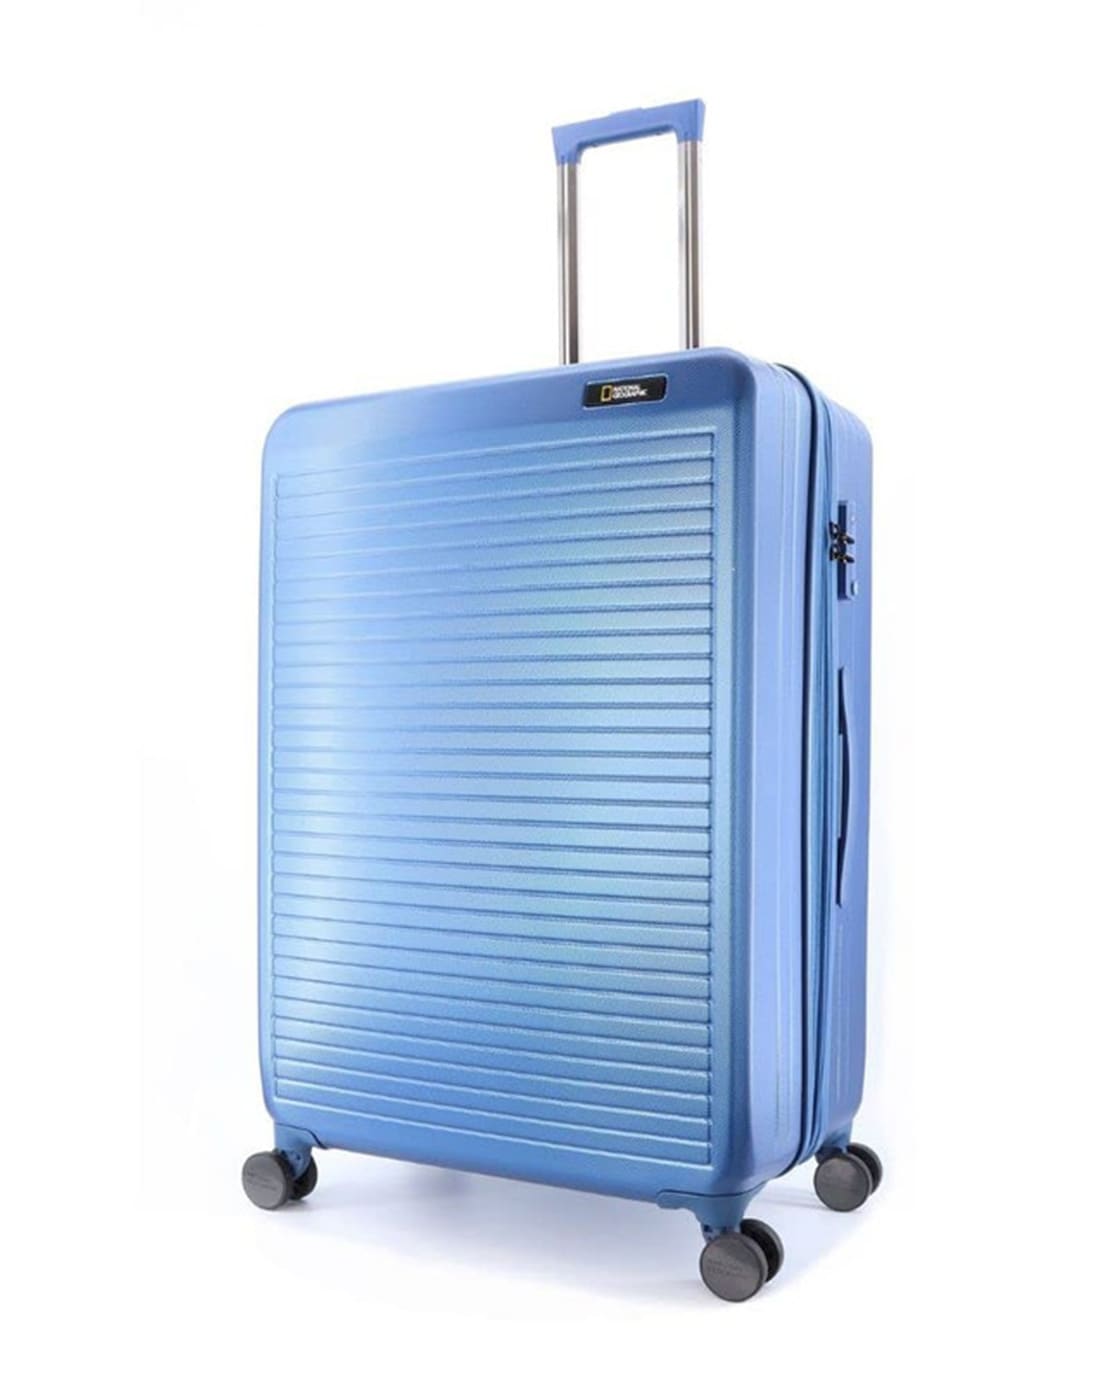 Source Portable small luggage ABS material cabin suitcase 185 hard  plastic luggage on malibabacom